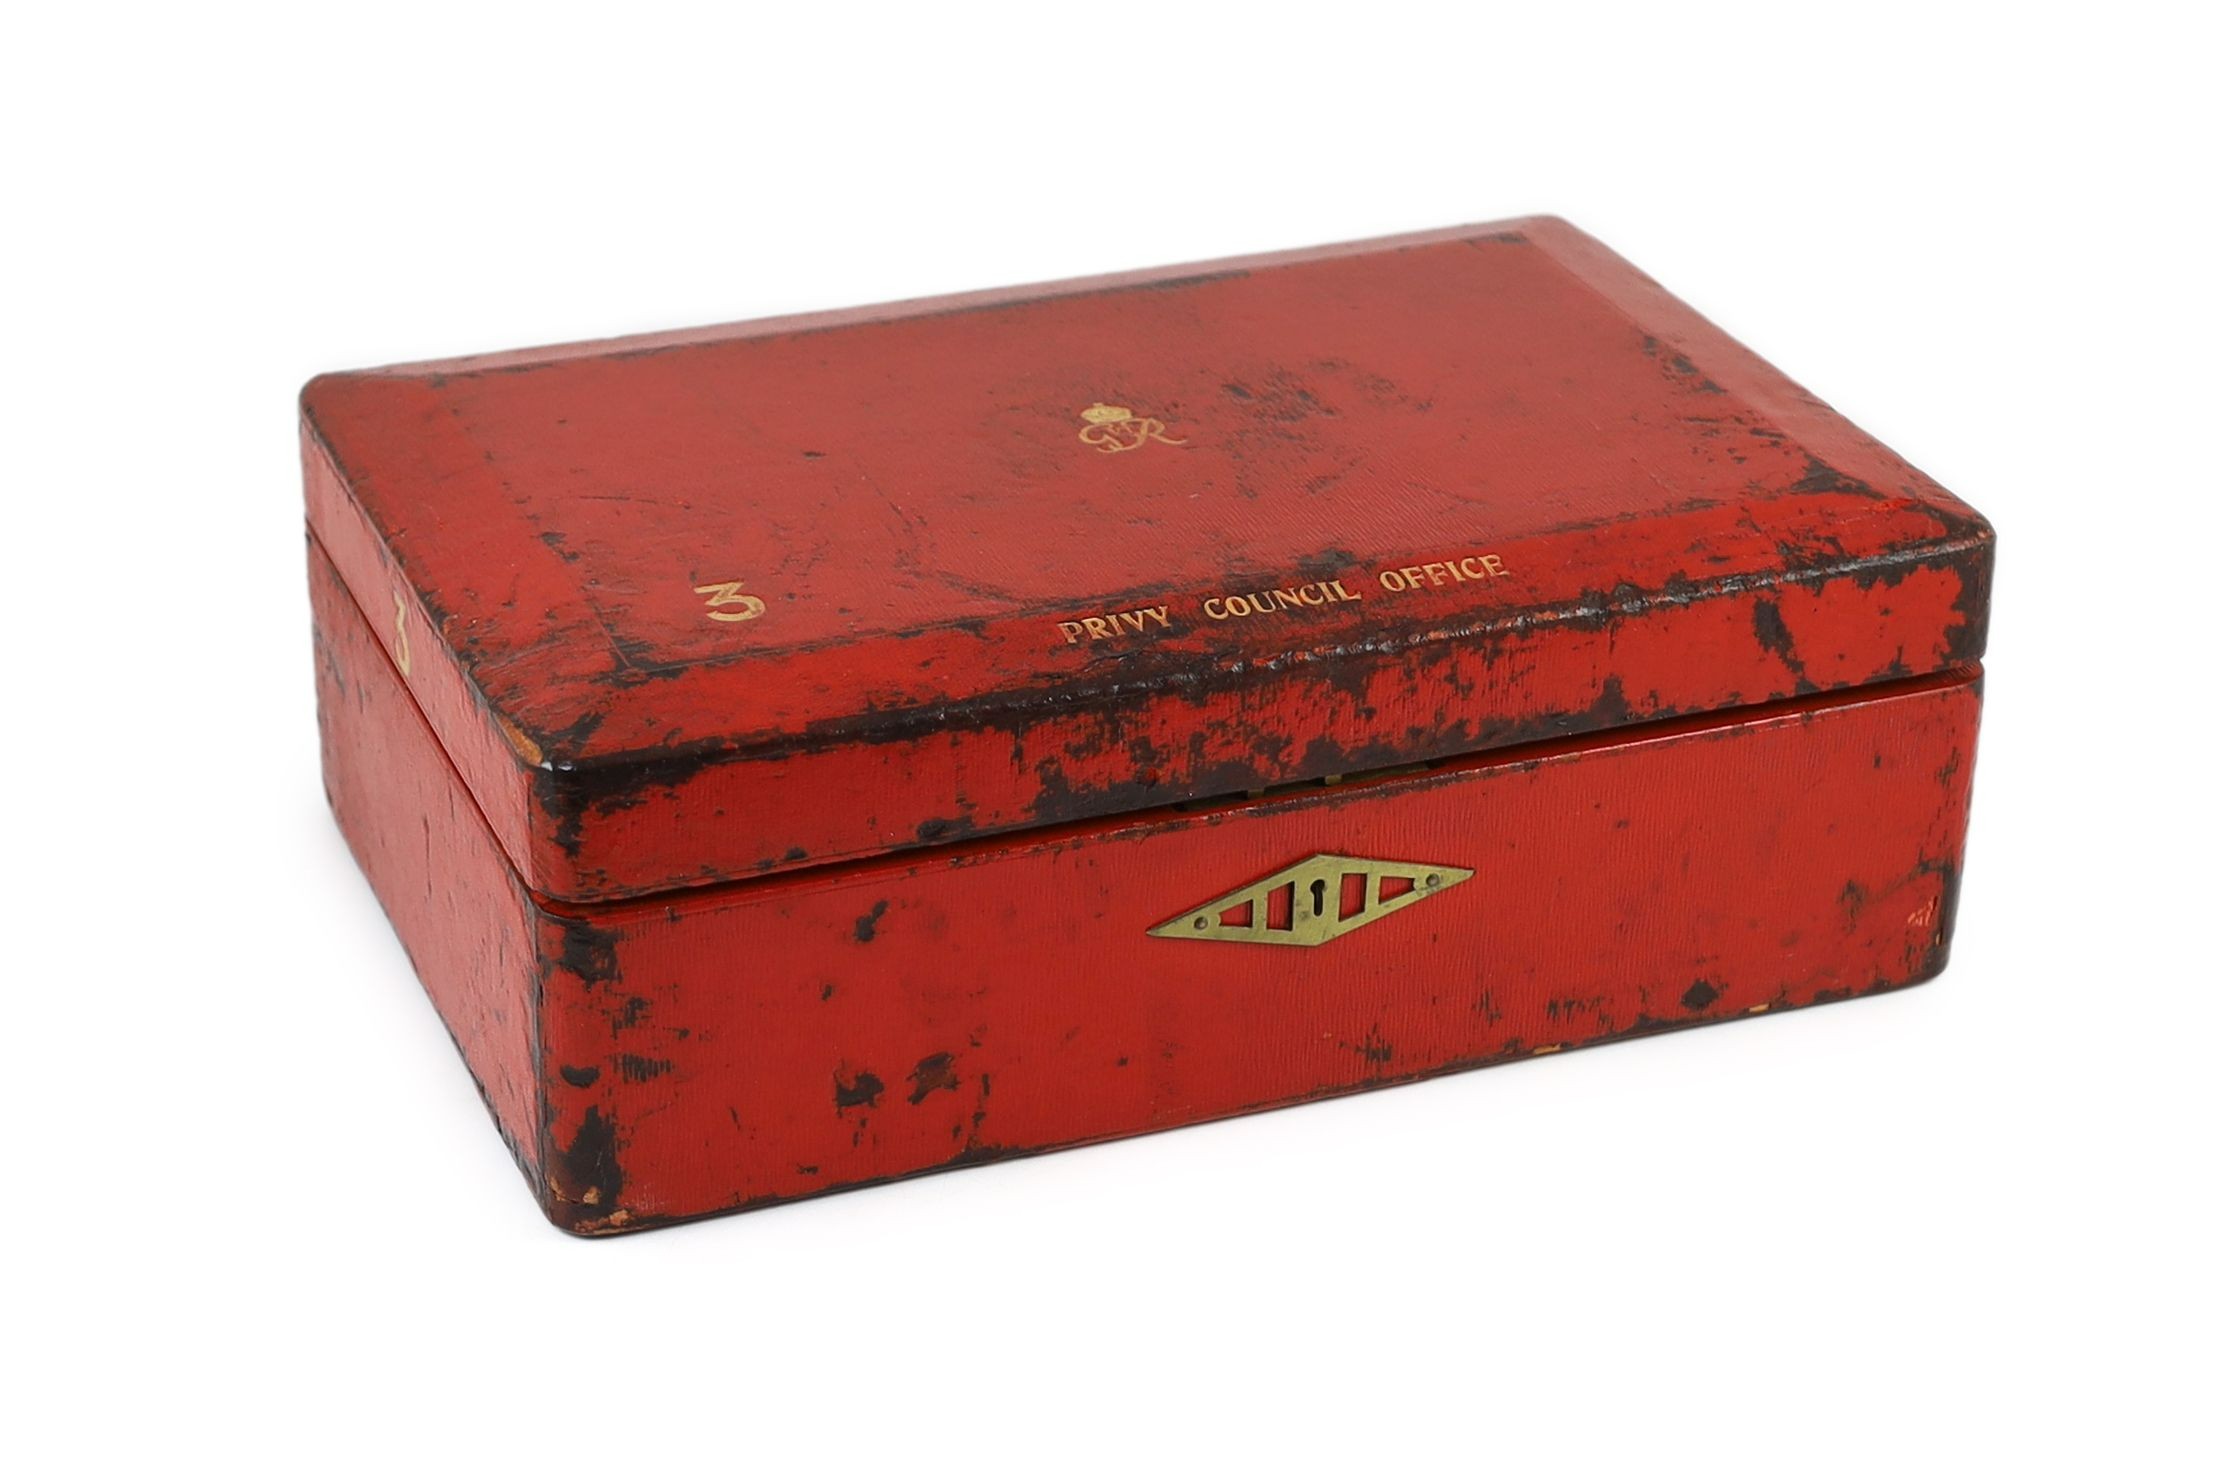 ° ° A George VI red morocco leather government despatch box, embossed in gold with the royal